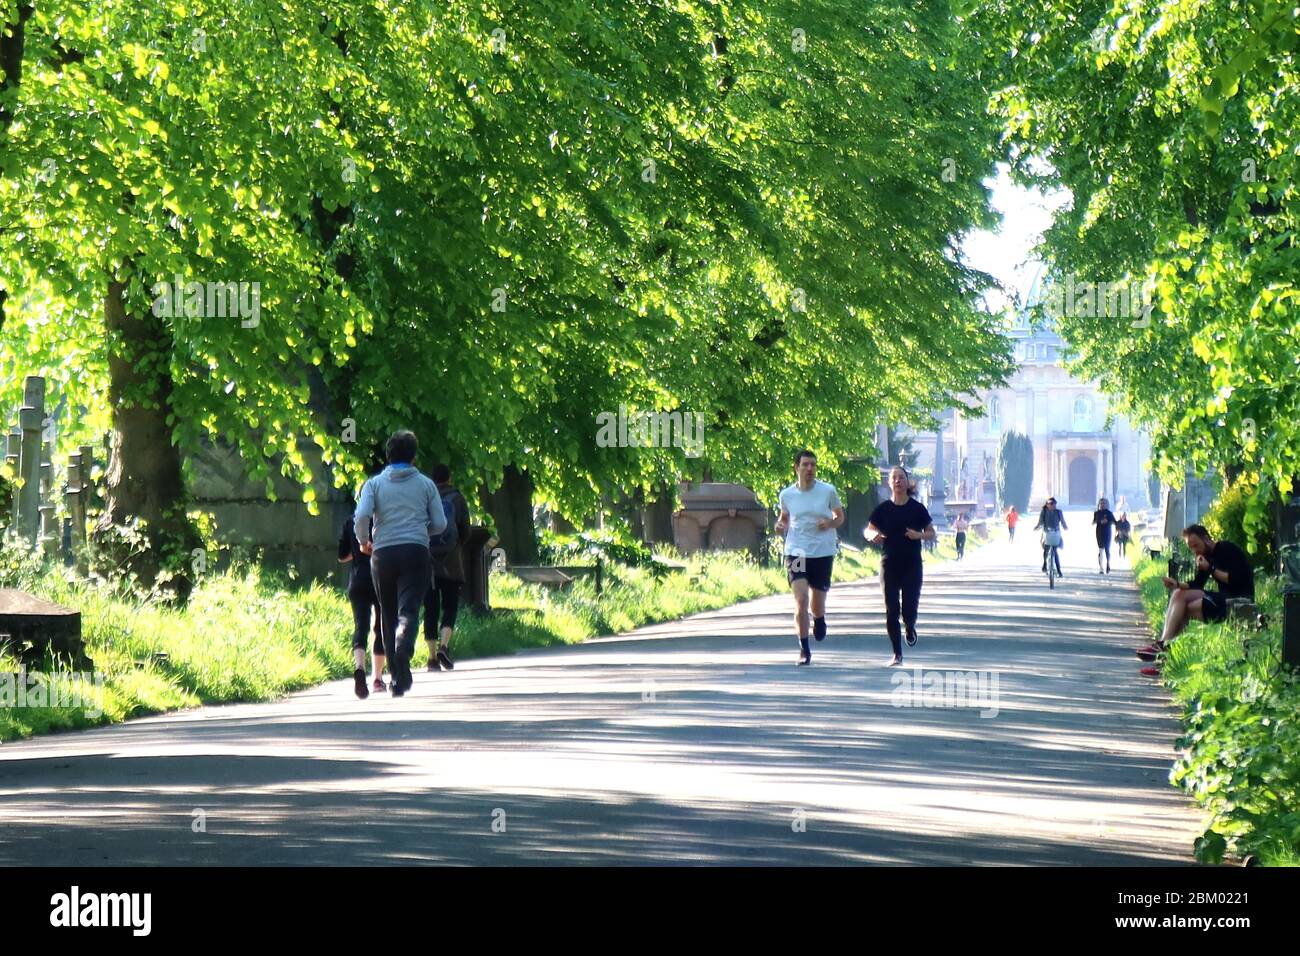 London, UK. 6th May, 2020. People get up early to exercise in the sunshine in Brompton Cemetery, West London. Credit: Brian Minkoff/Alamy Live News Stock Photo